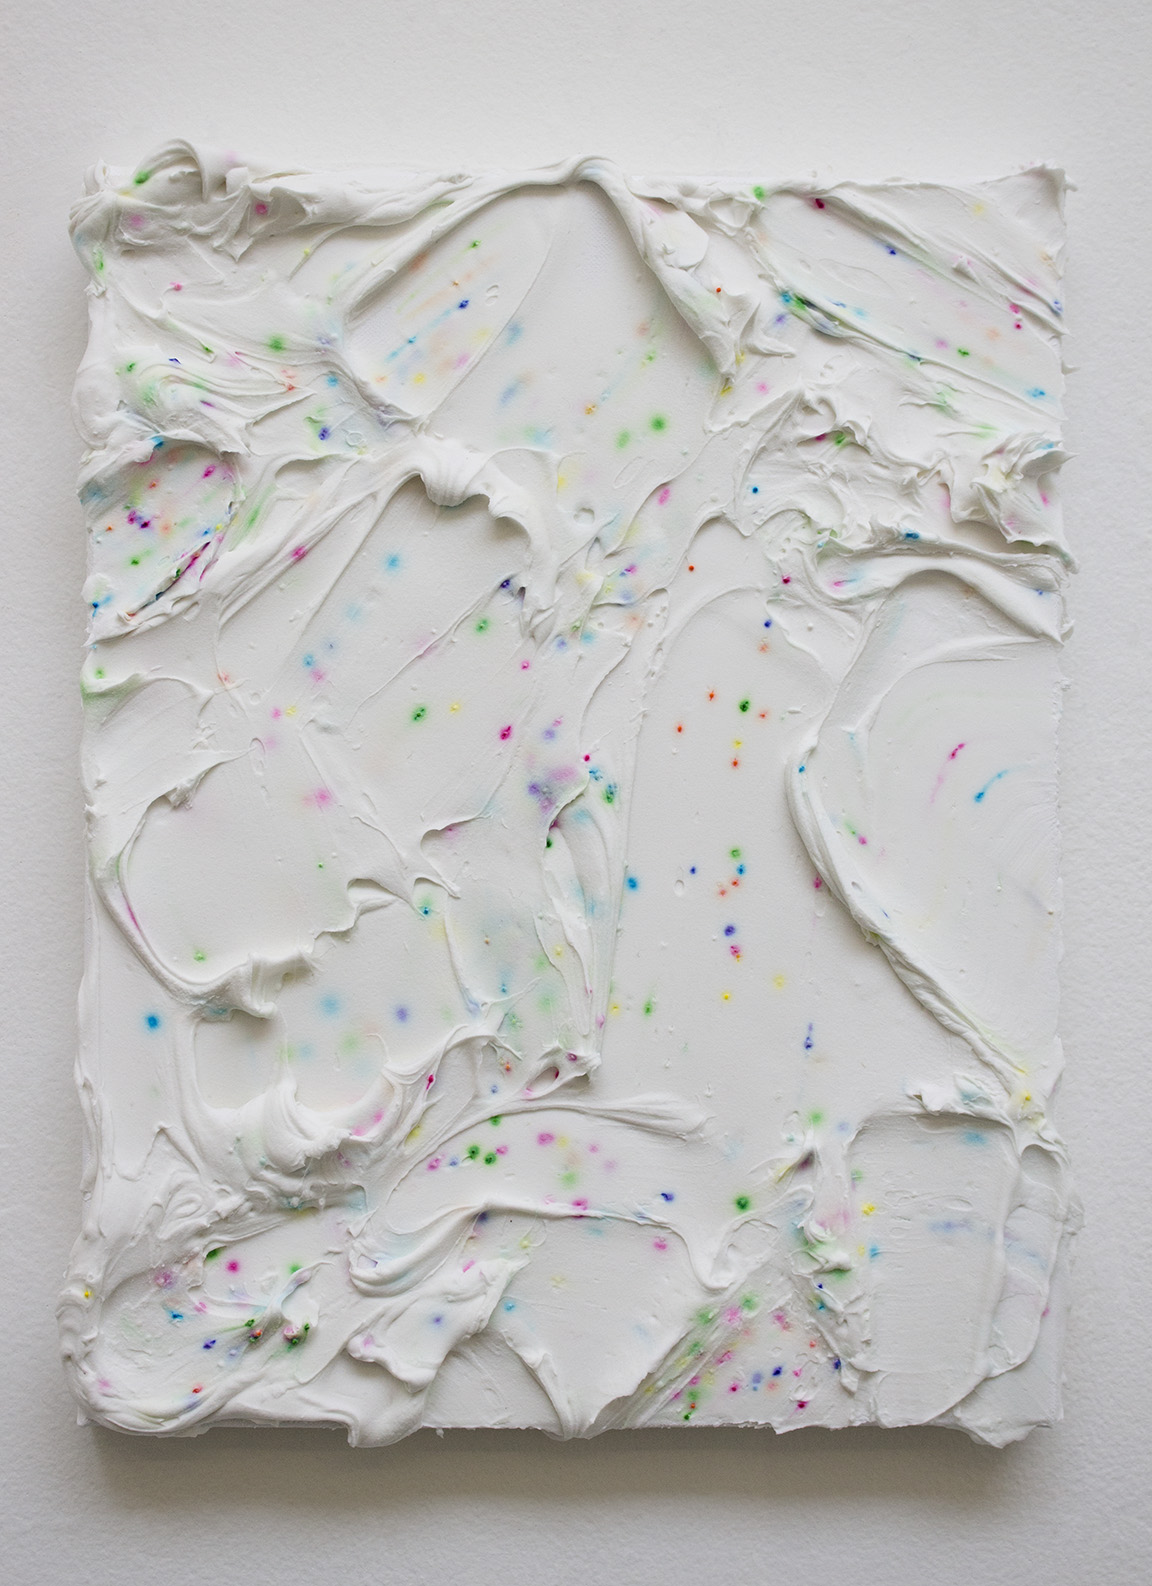   Untitled  Acrylic and sprinkles on canvas 18" x 14" 2014 